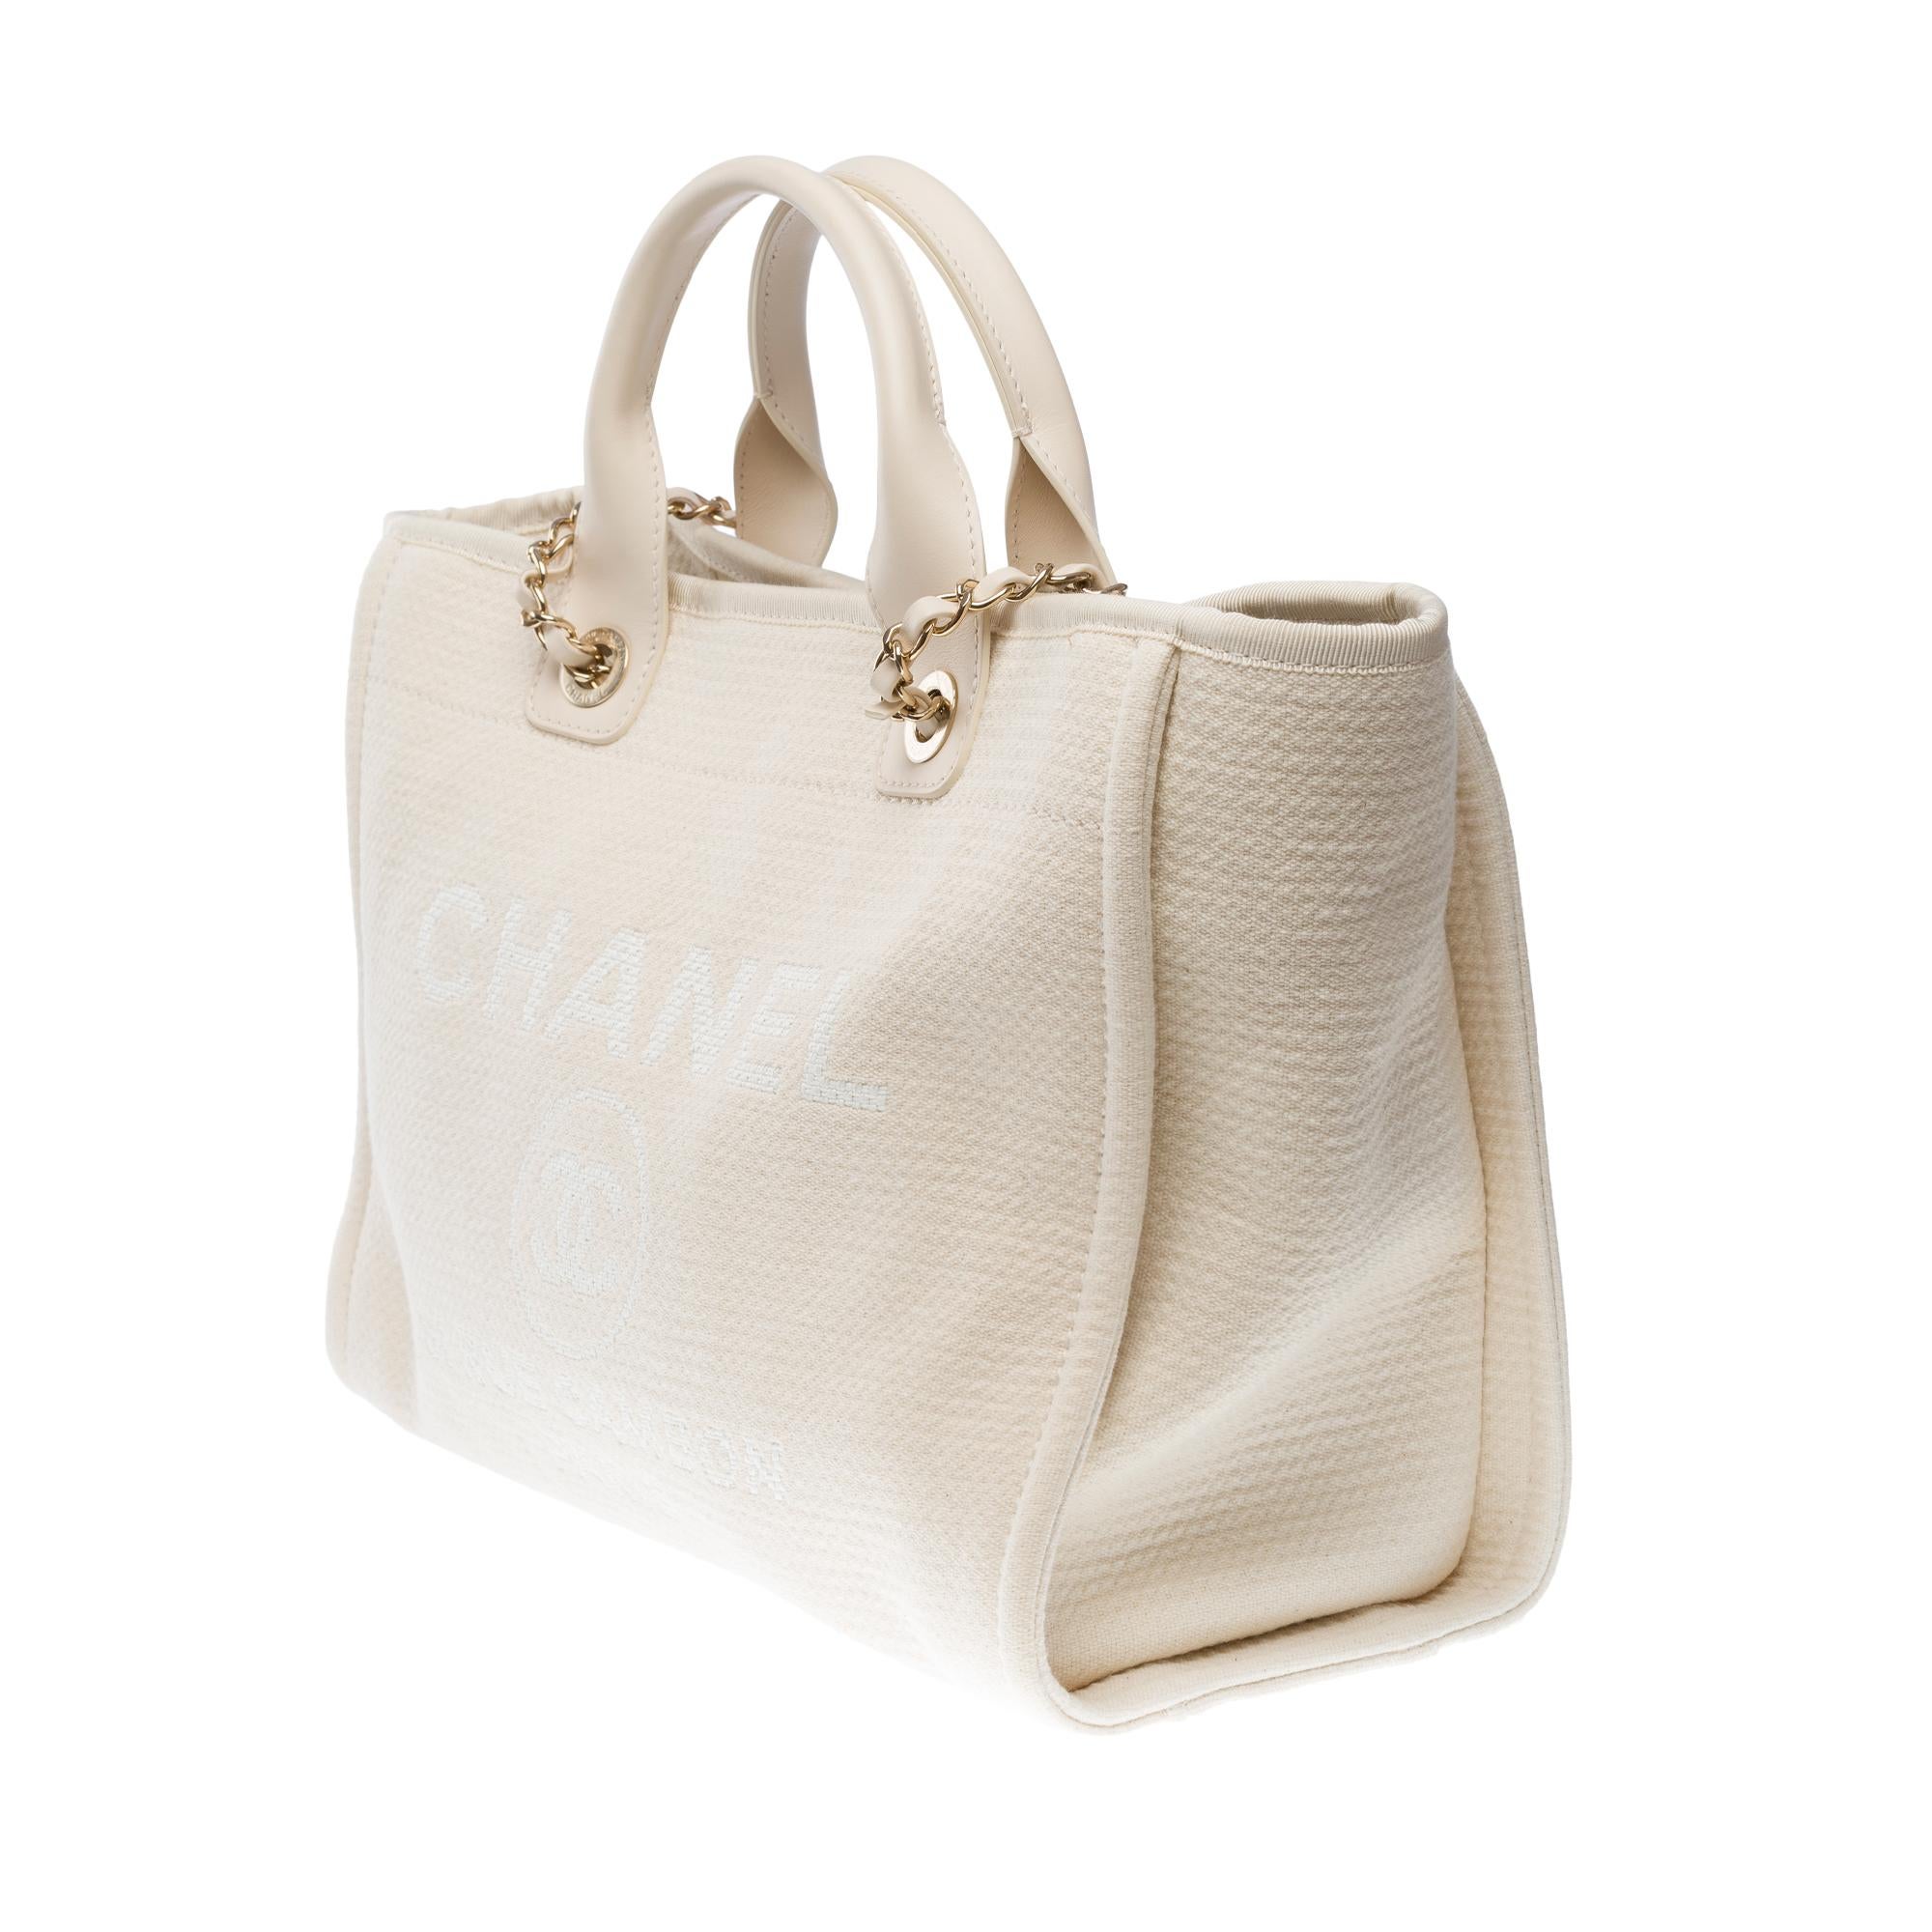 Amazing Chanel Deauville tote bag in off white canvas, SHW For Sale 2